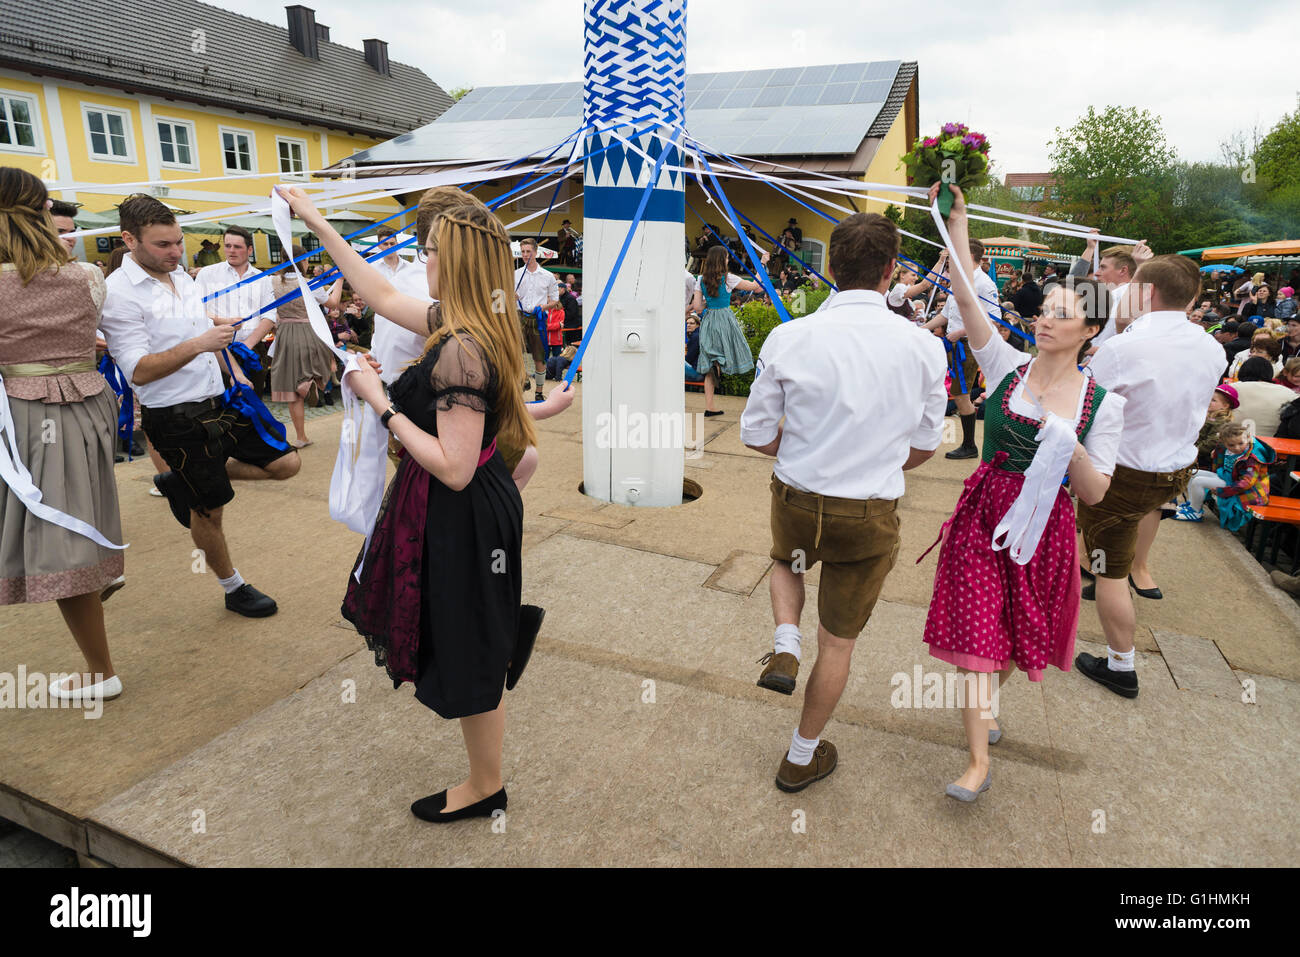 Women and men in local costumes dancing a traditional Bavarian folk dance  around the maypole holding blue and white ribbons Stock Photo